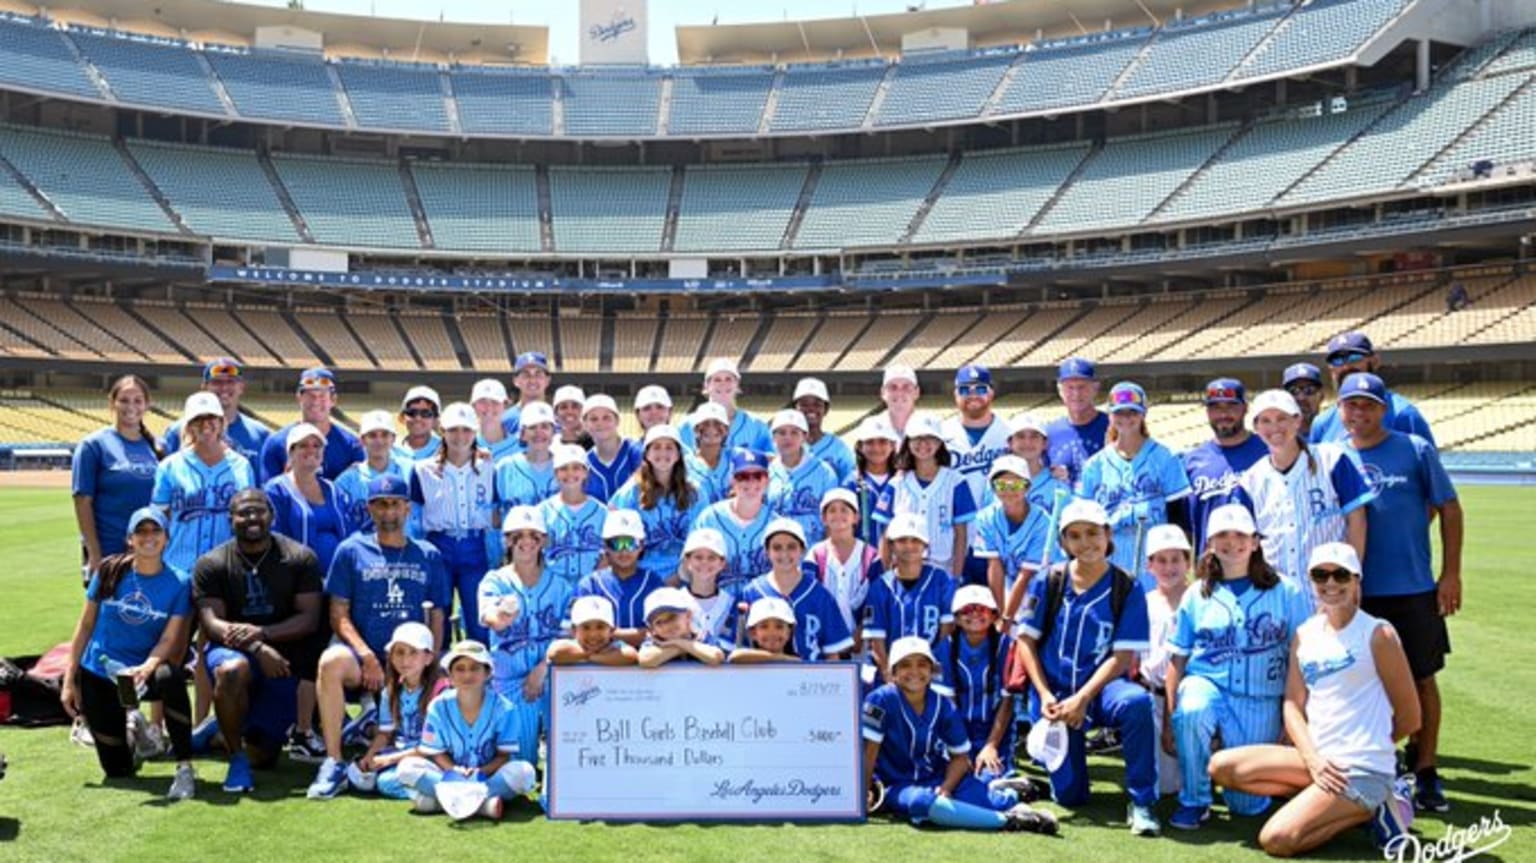 A group photo of girls and instructors in the sunshine on the Dodger Stadium grass